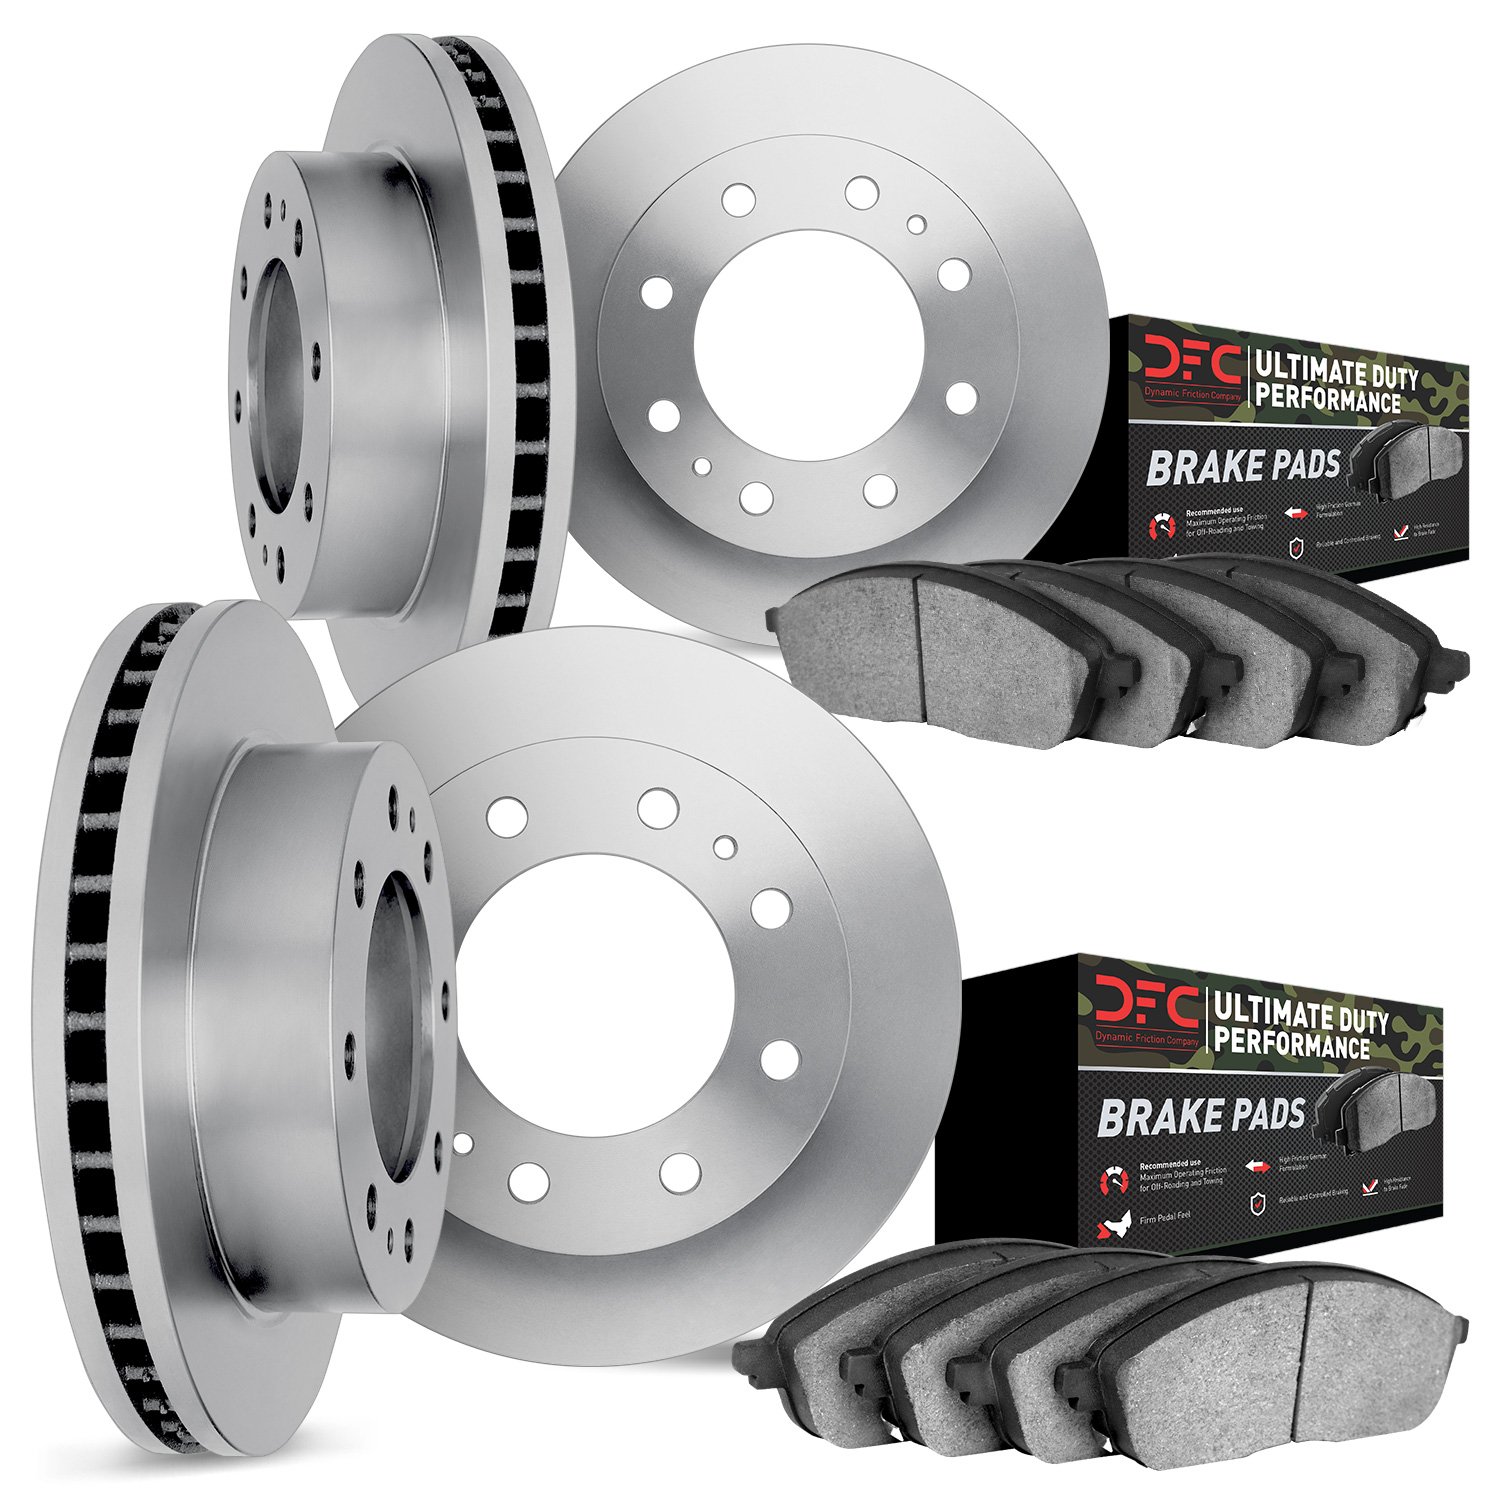 6404-54156 Brake Rotors with Ultimate-Duty Brake Pads, Fits Select Ford/Lincoln/Mercury/Mazda, Position: Front and Rear